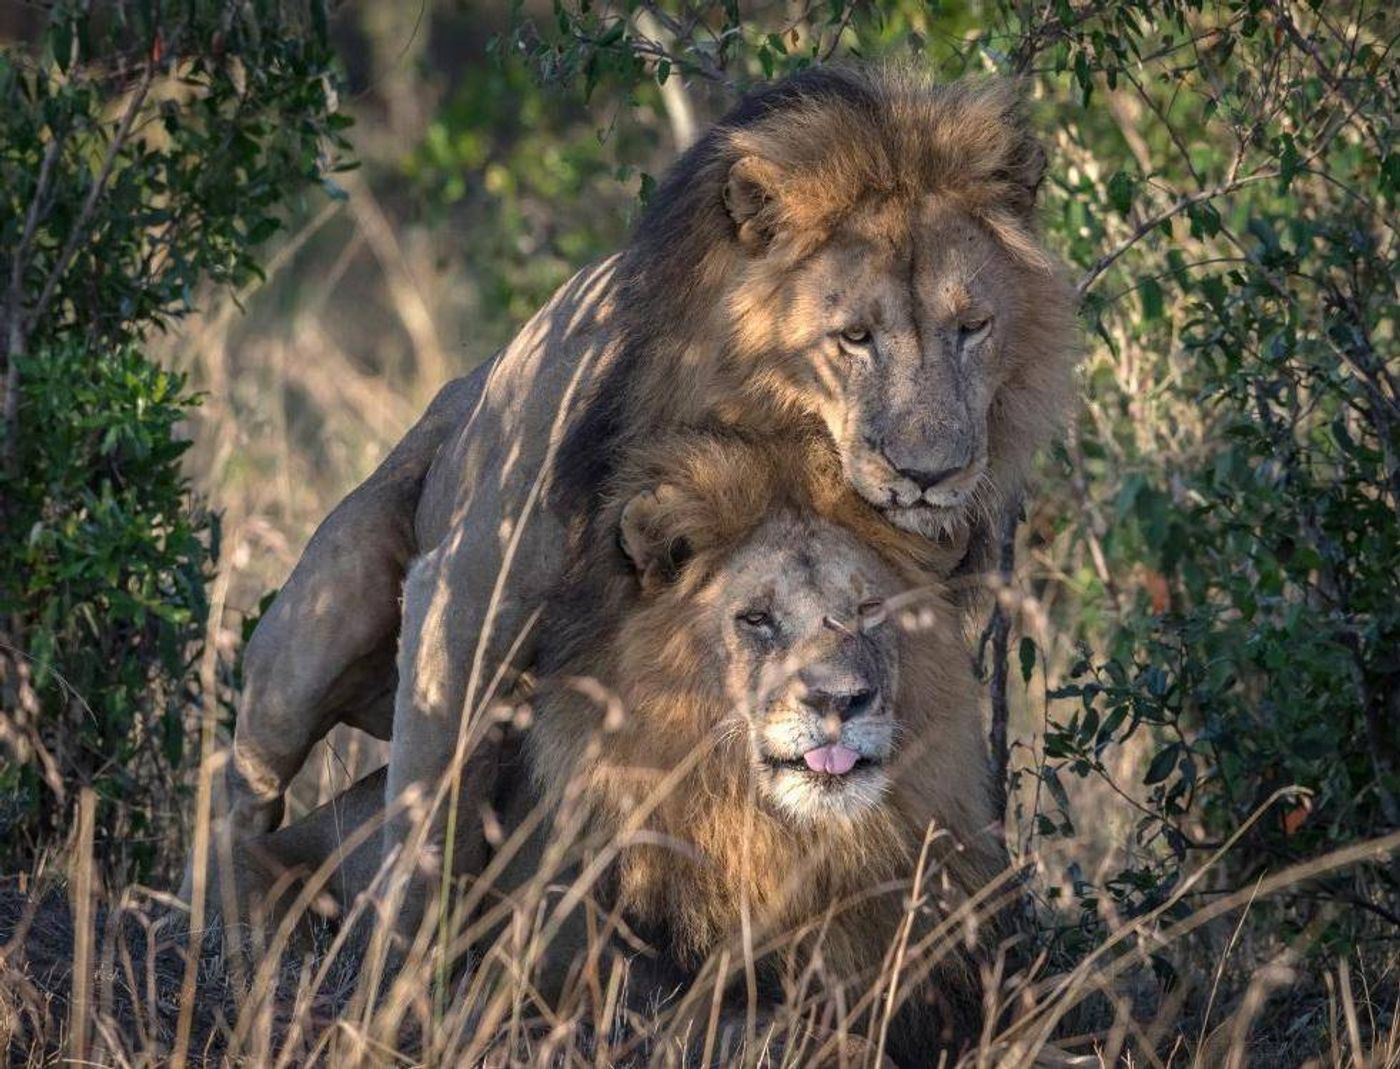 In this picture, a male lion appears to mount another male for unexplained reasons.